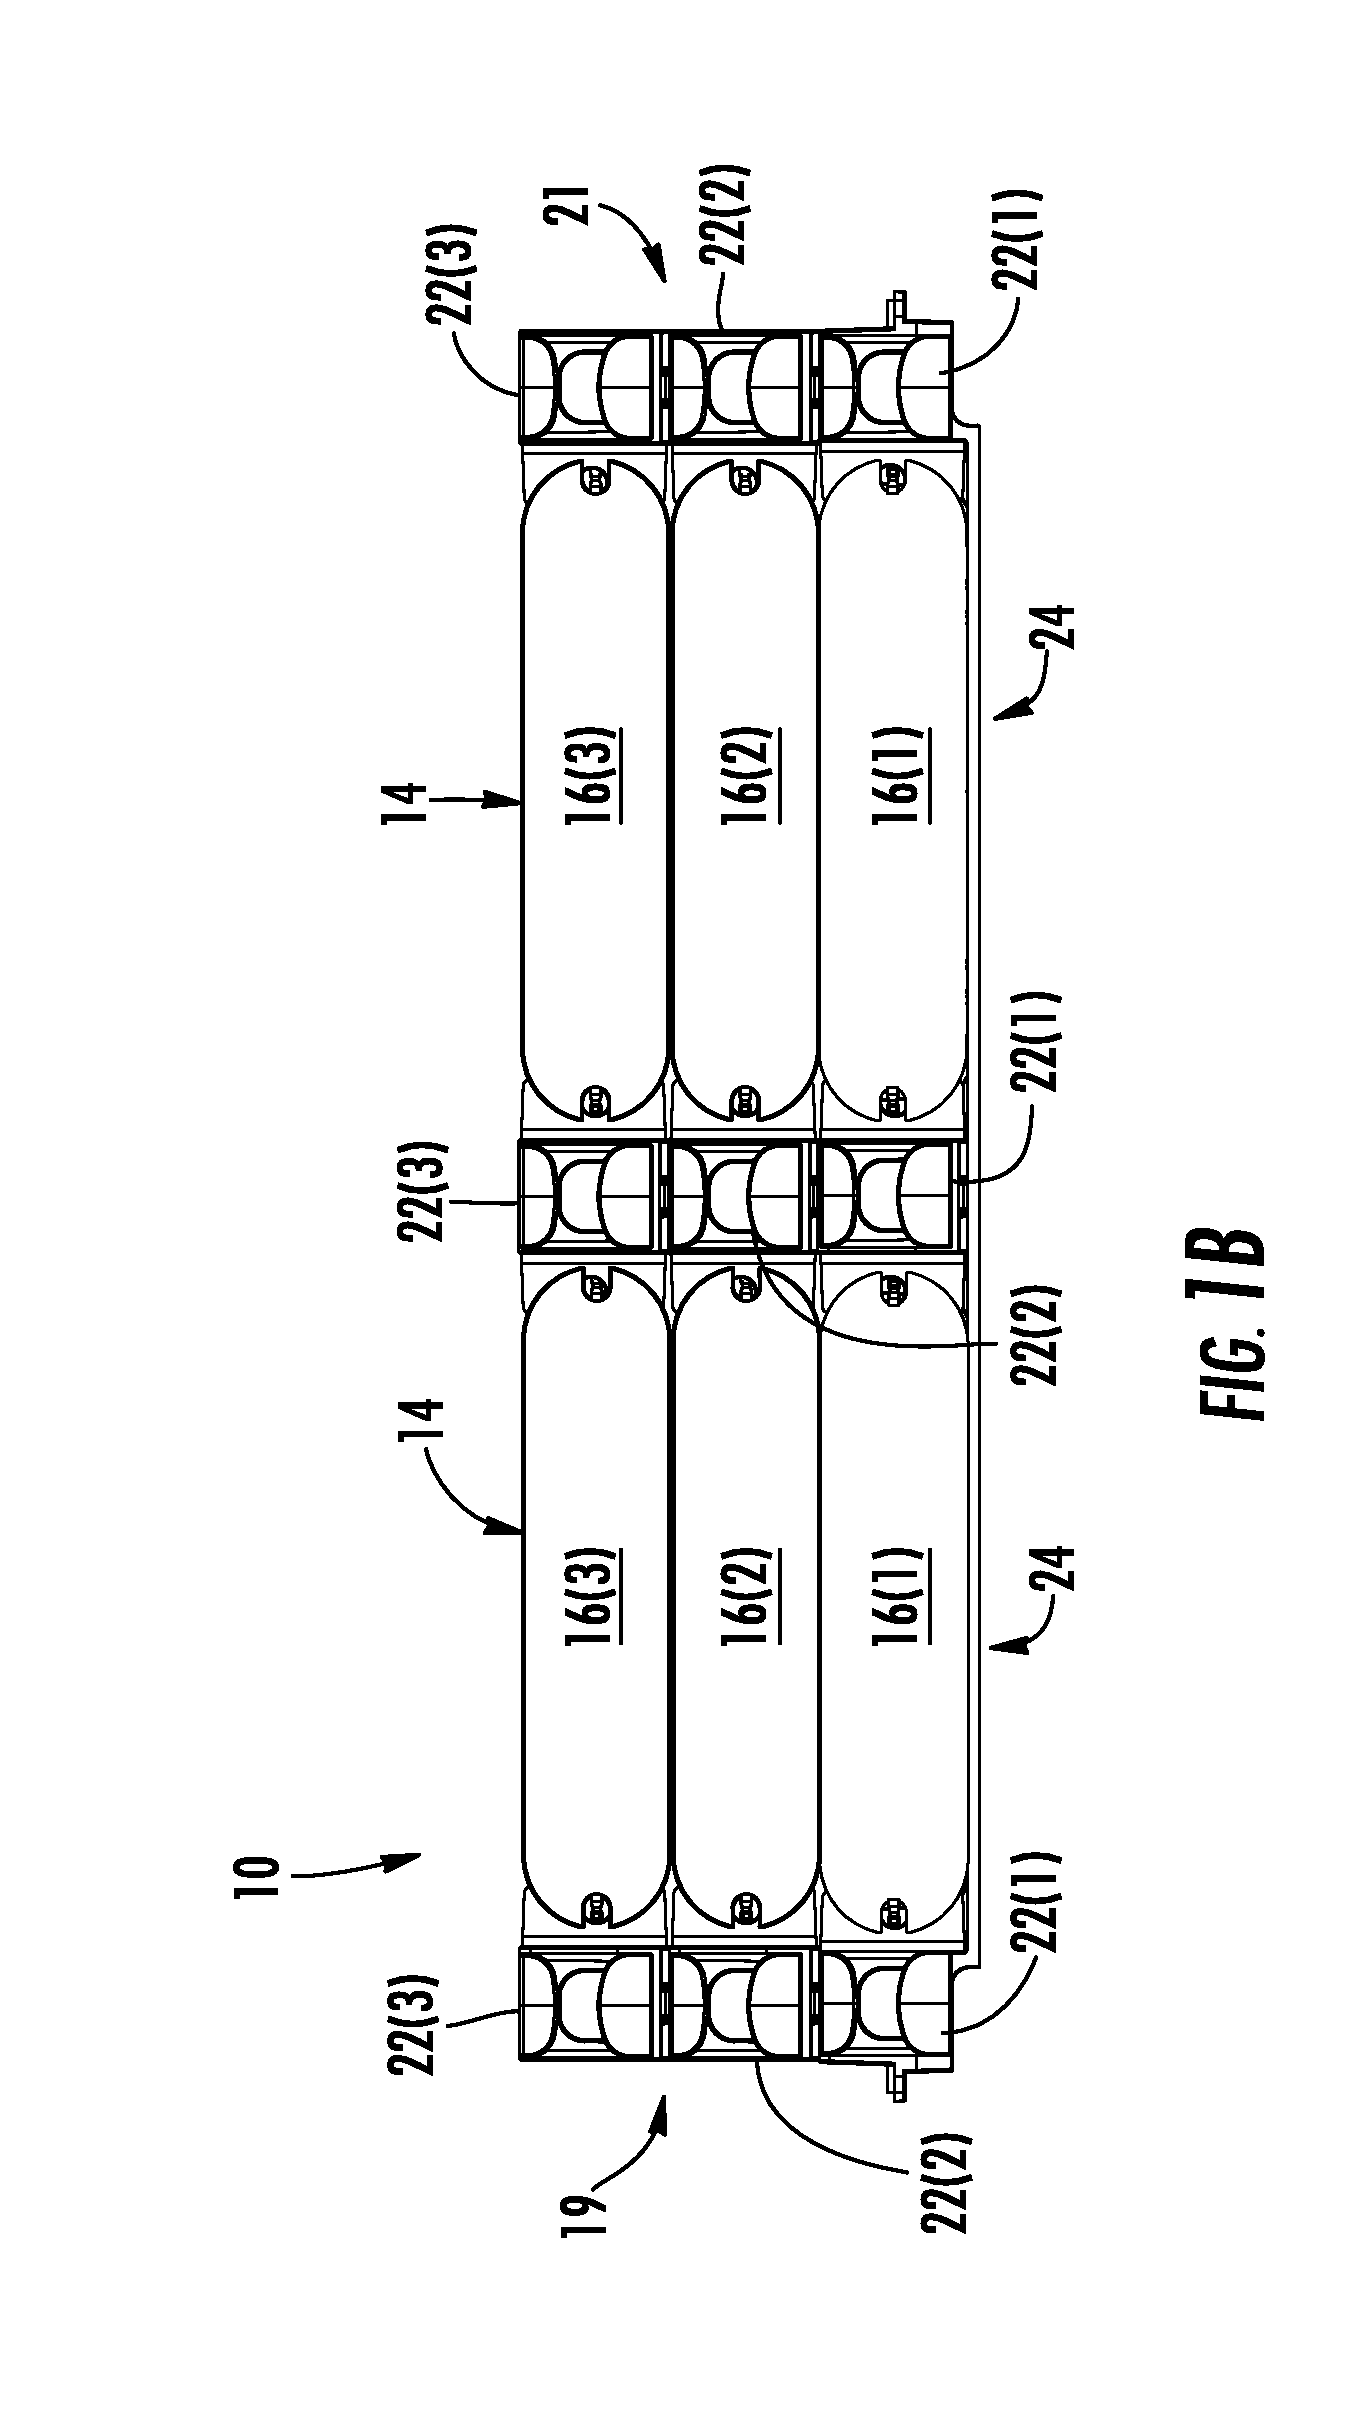 Stackable shelves for a fiber optic housing, and related components and methods